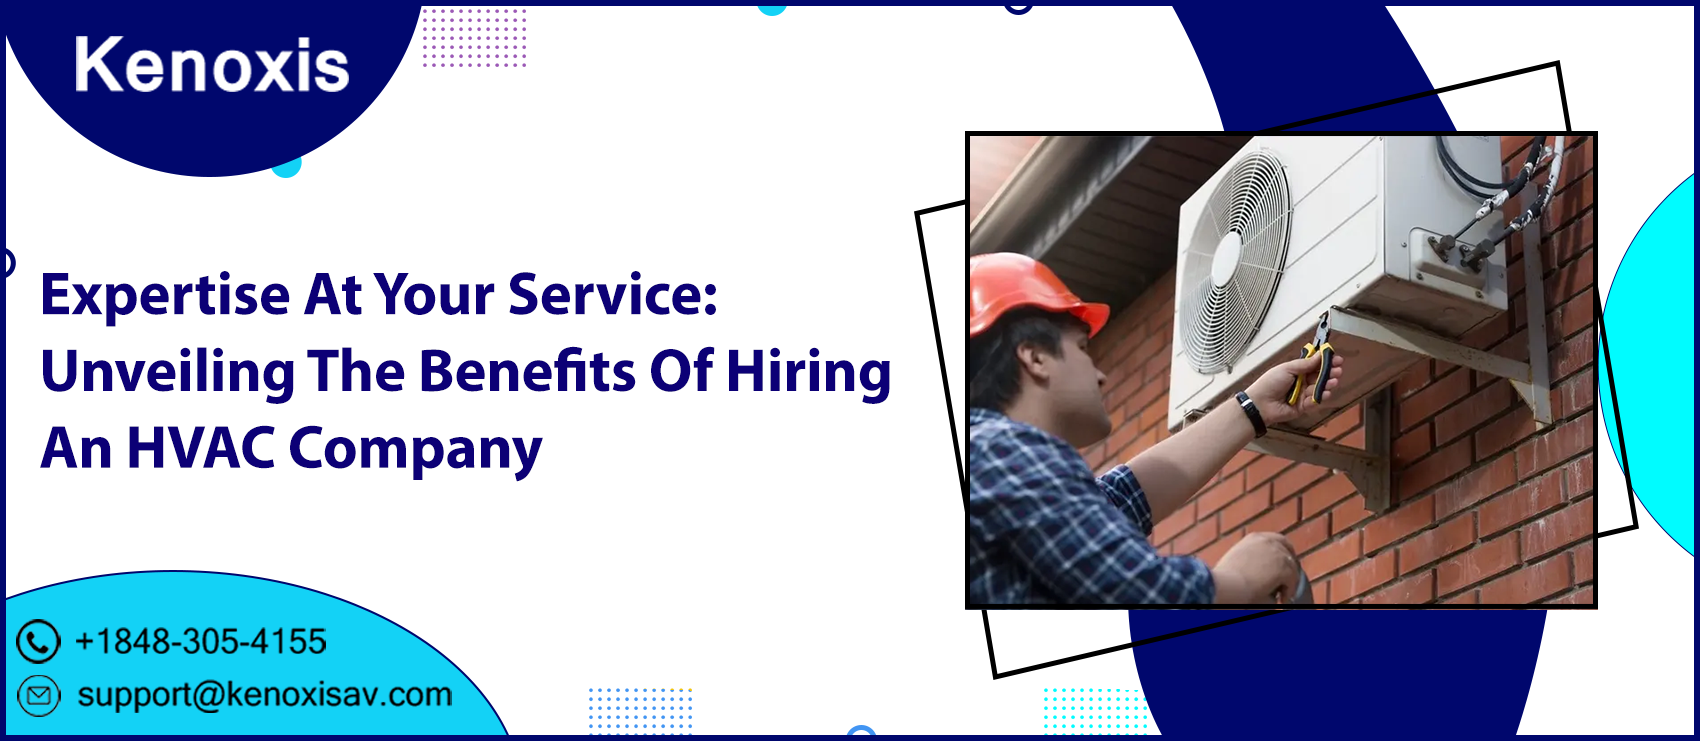 Expertise At Your Service: Unveiling The Benefits Of Hiring An HVAC Company